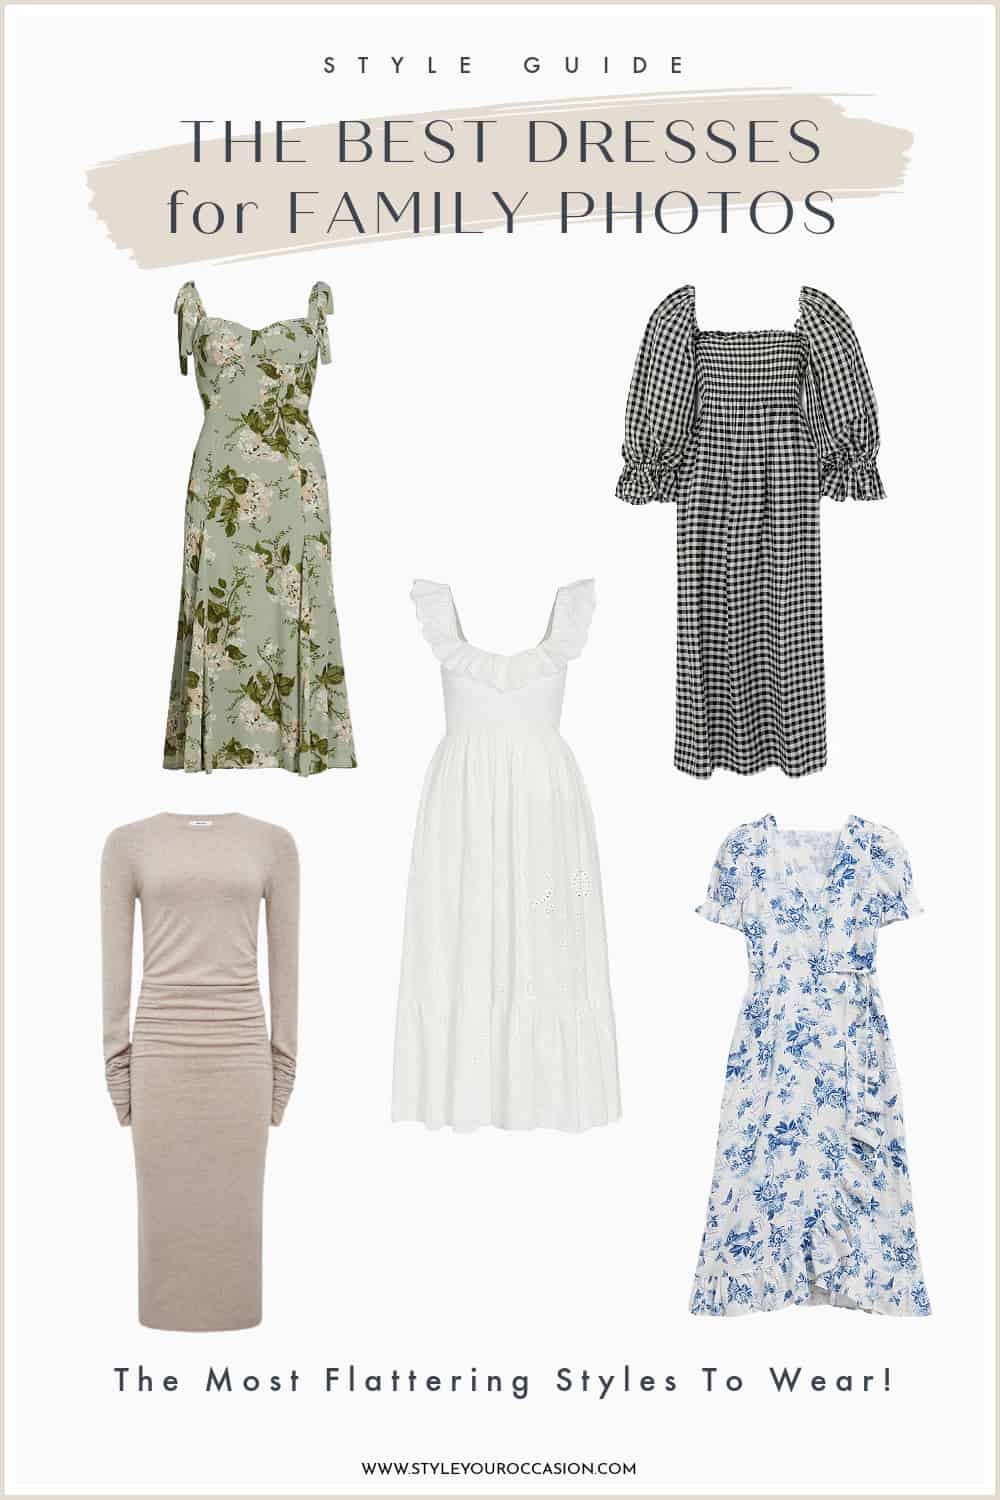 an image board of the best dresses to wear during a family photoshoot, including floral, gingham, and solid-colored dresses